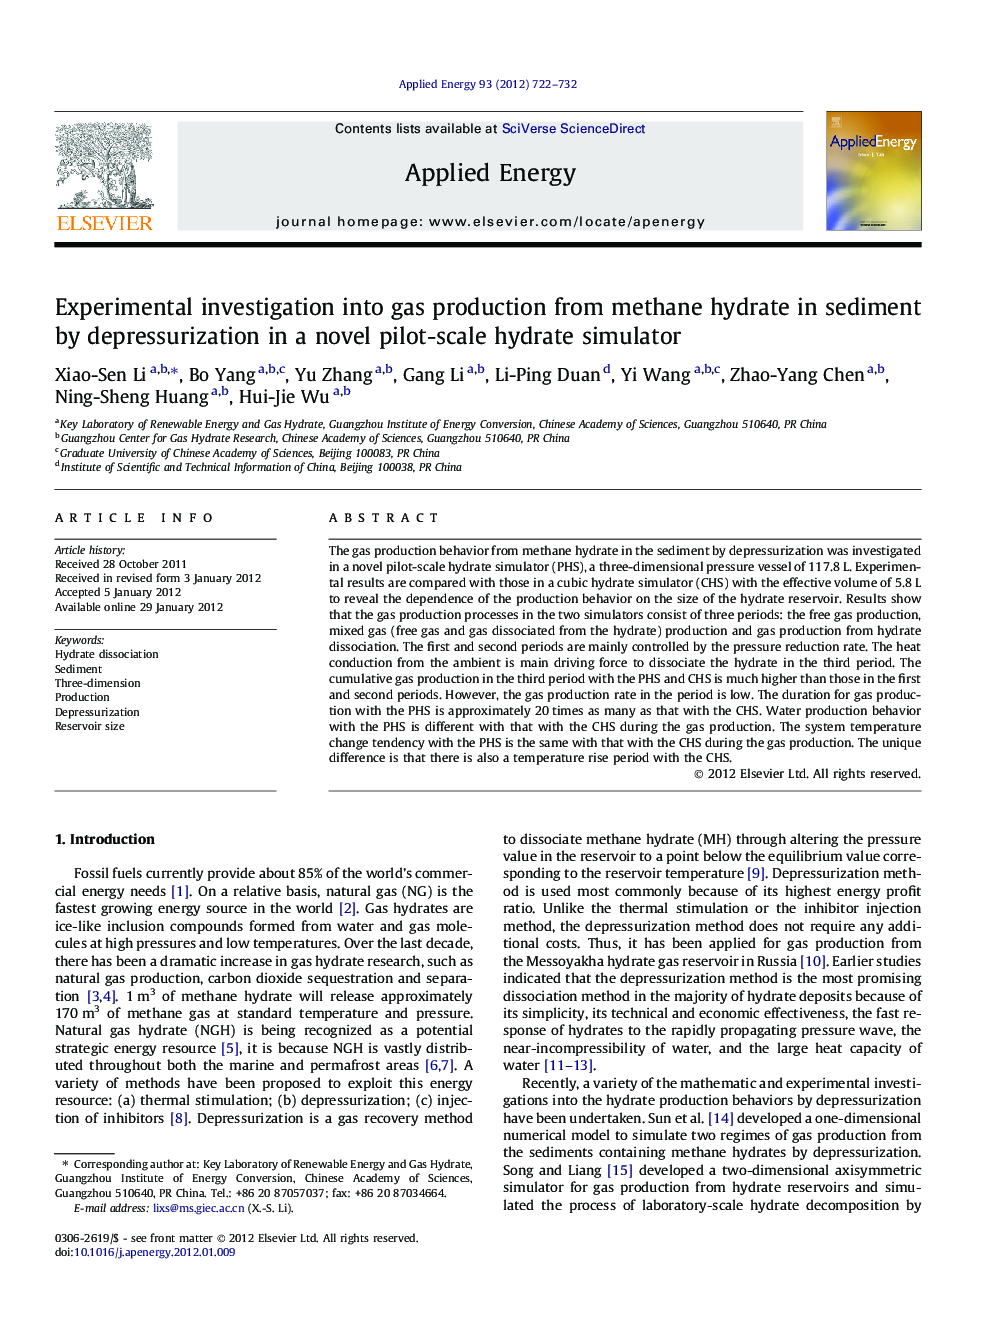 Experimental investigation into gas production from methane hydrate in sediment by depressurization in a novel pilot-scale hydrate simulator